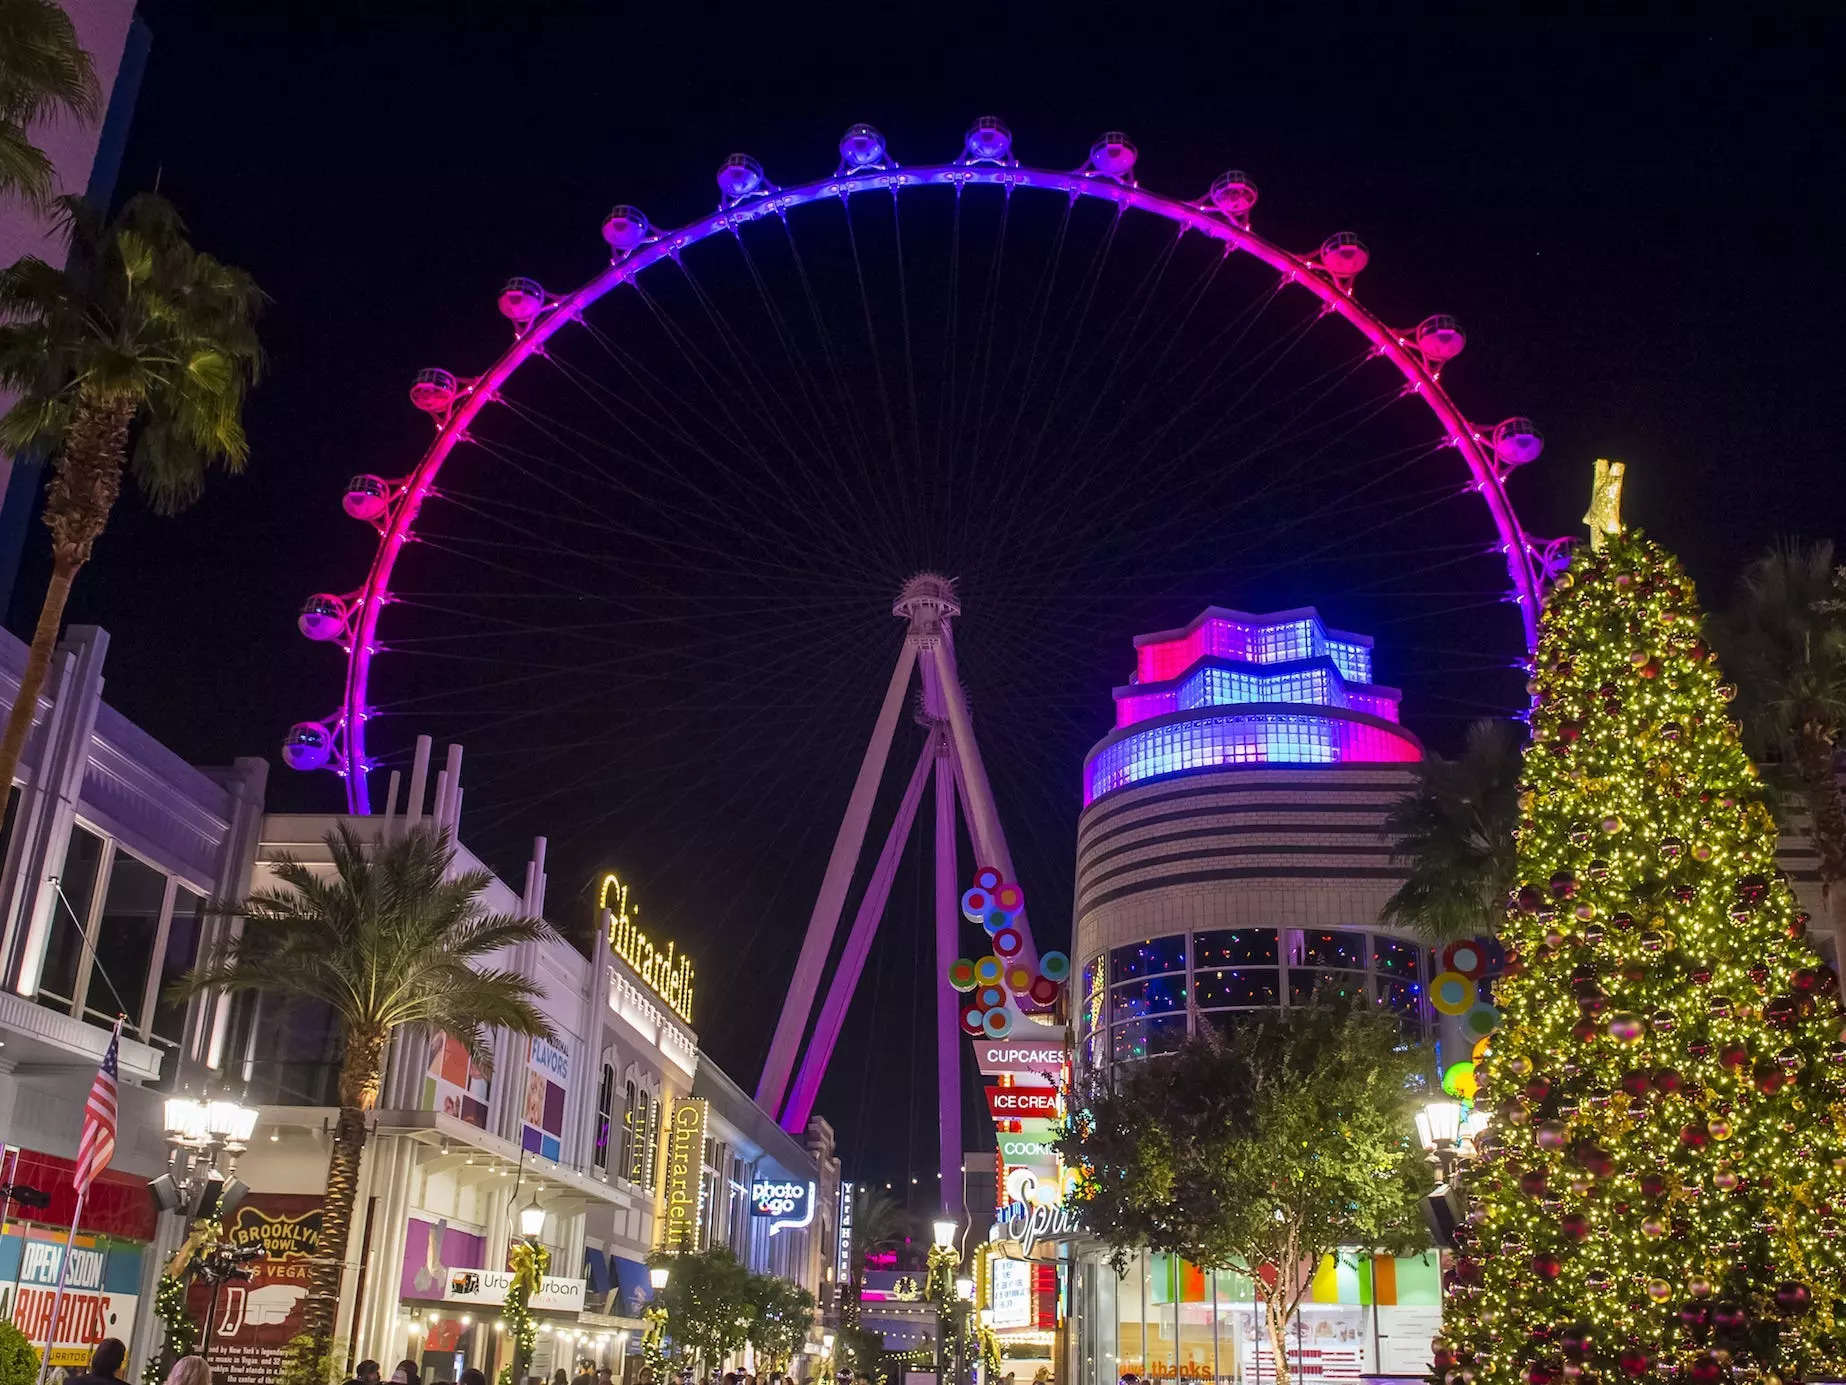 12 Mistakes Travelers Make in Las Vegas — and How to Avoid Them